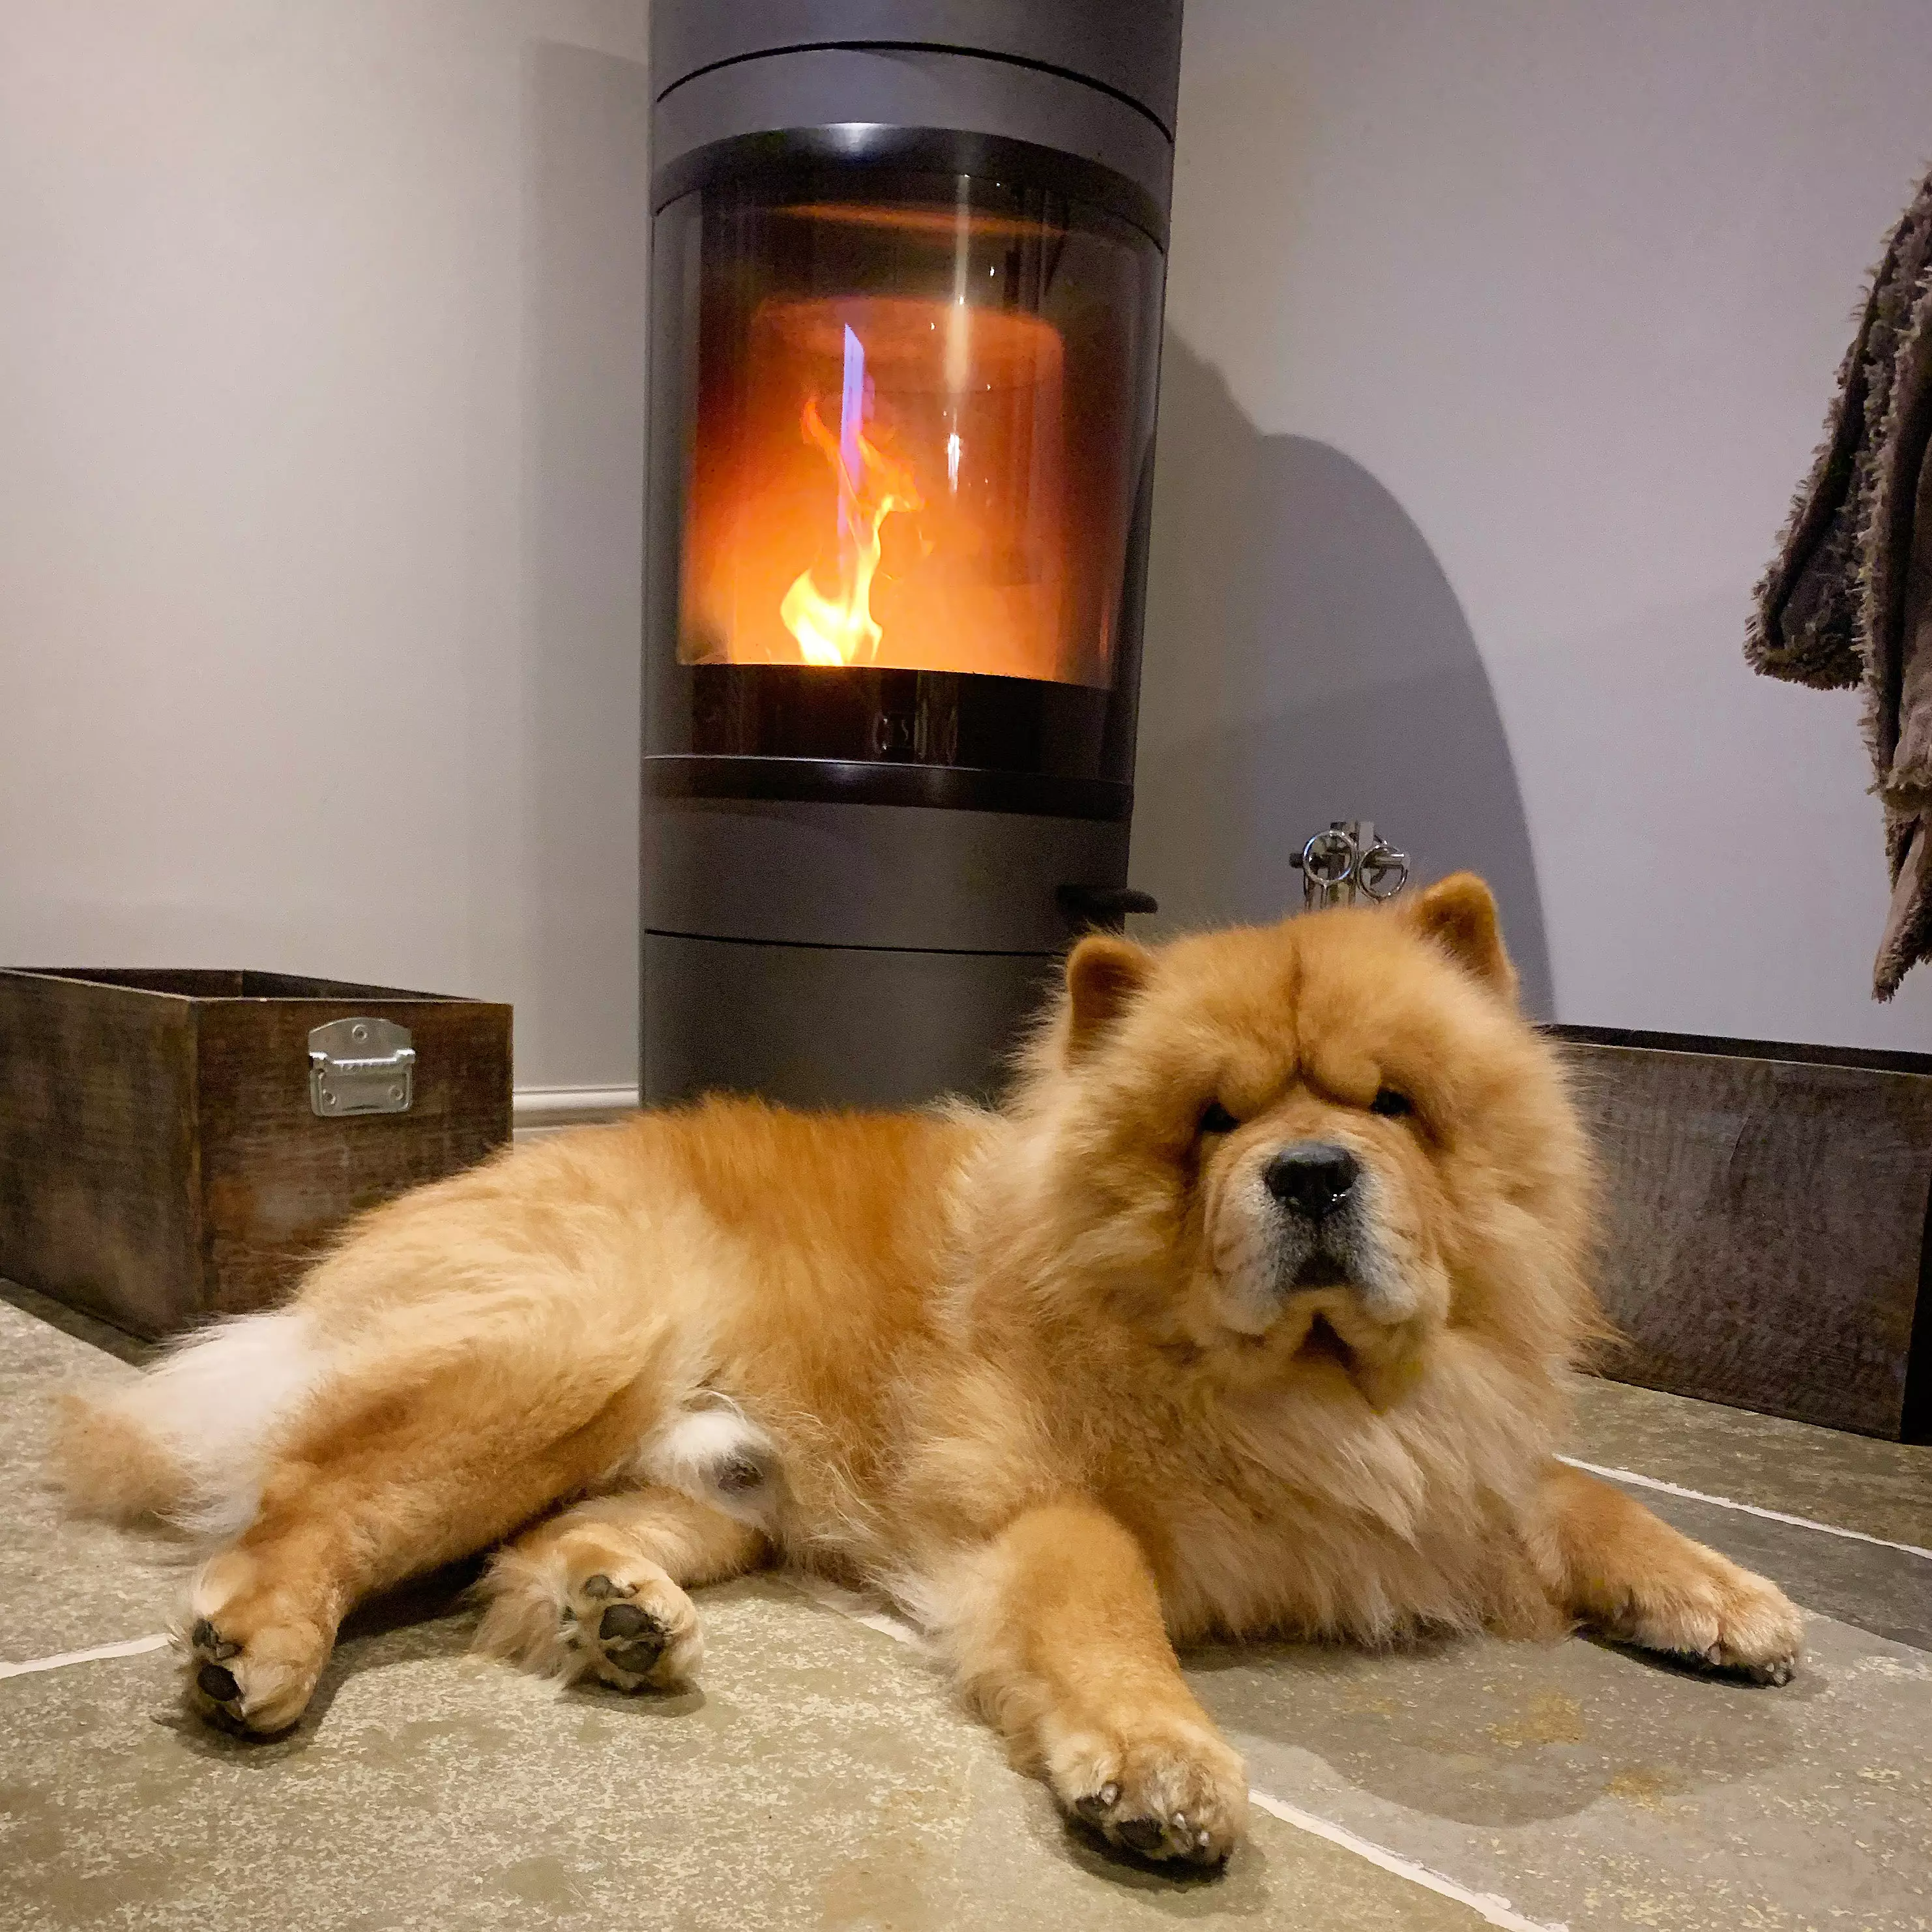 You can chill out with your dog infront of the fire in a luxury cottage (